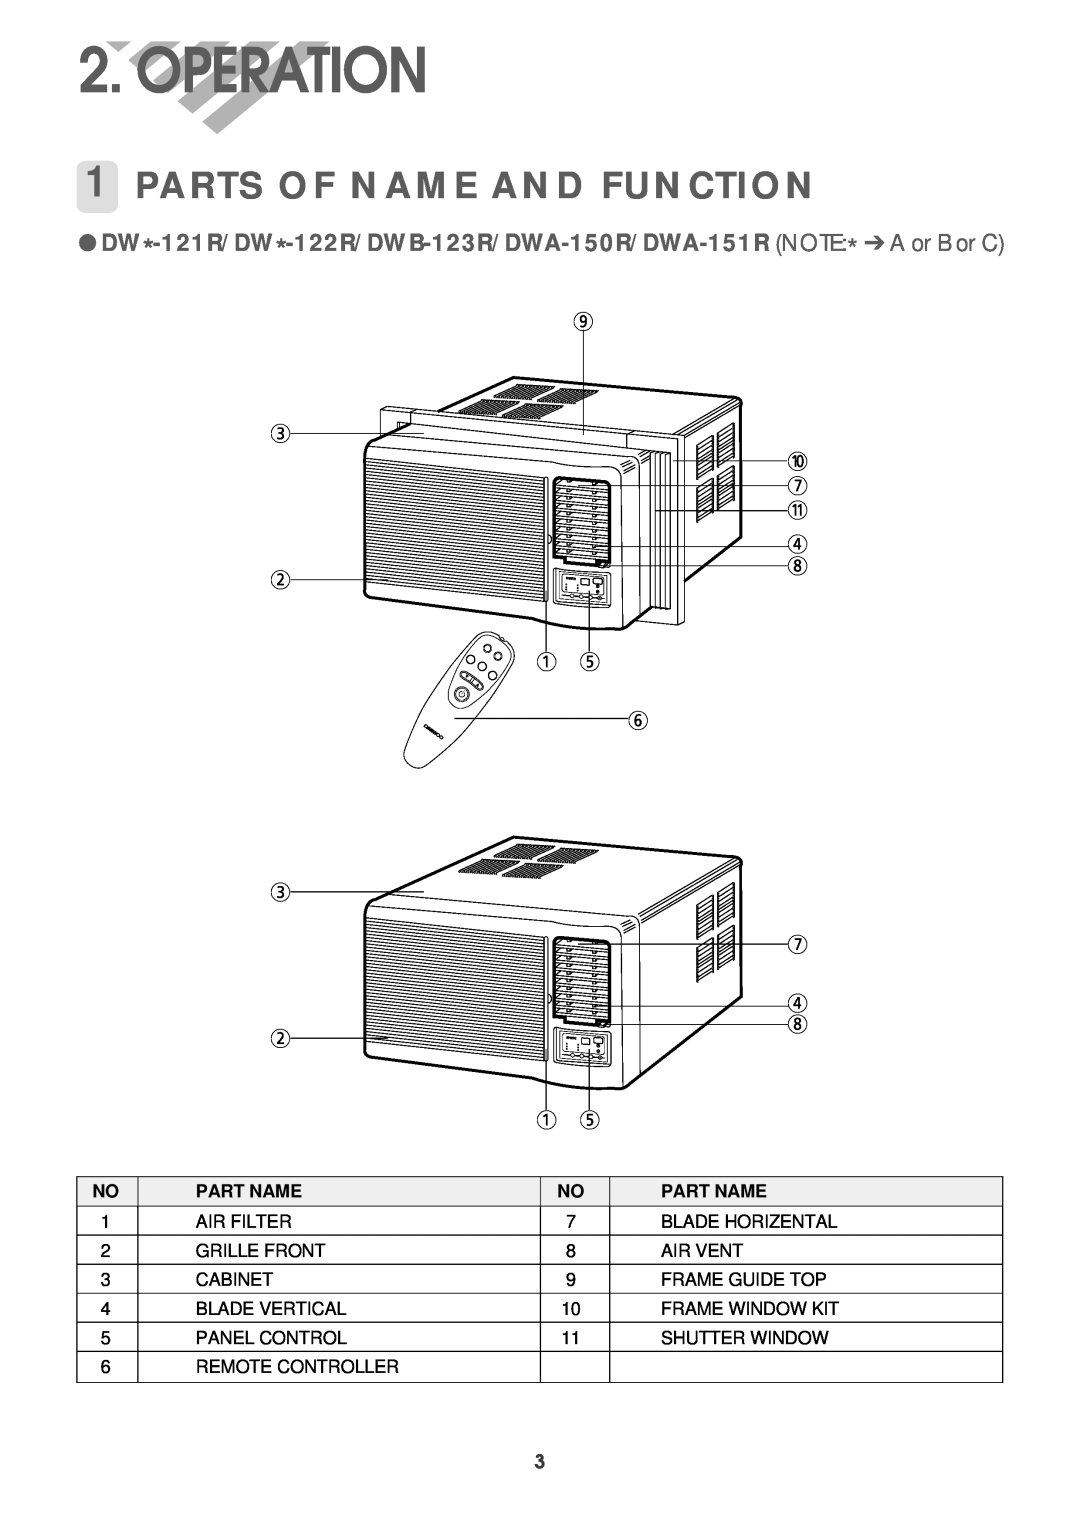 Daewoo DWC-121R service manual Operation, 1PARTS OF NAME AND FUNCTION, Part Name 